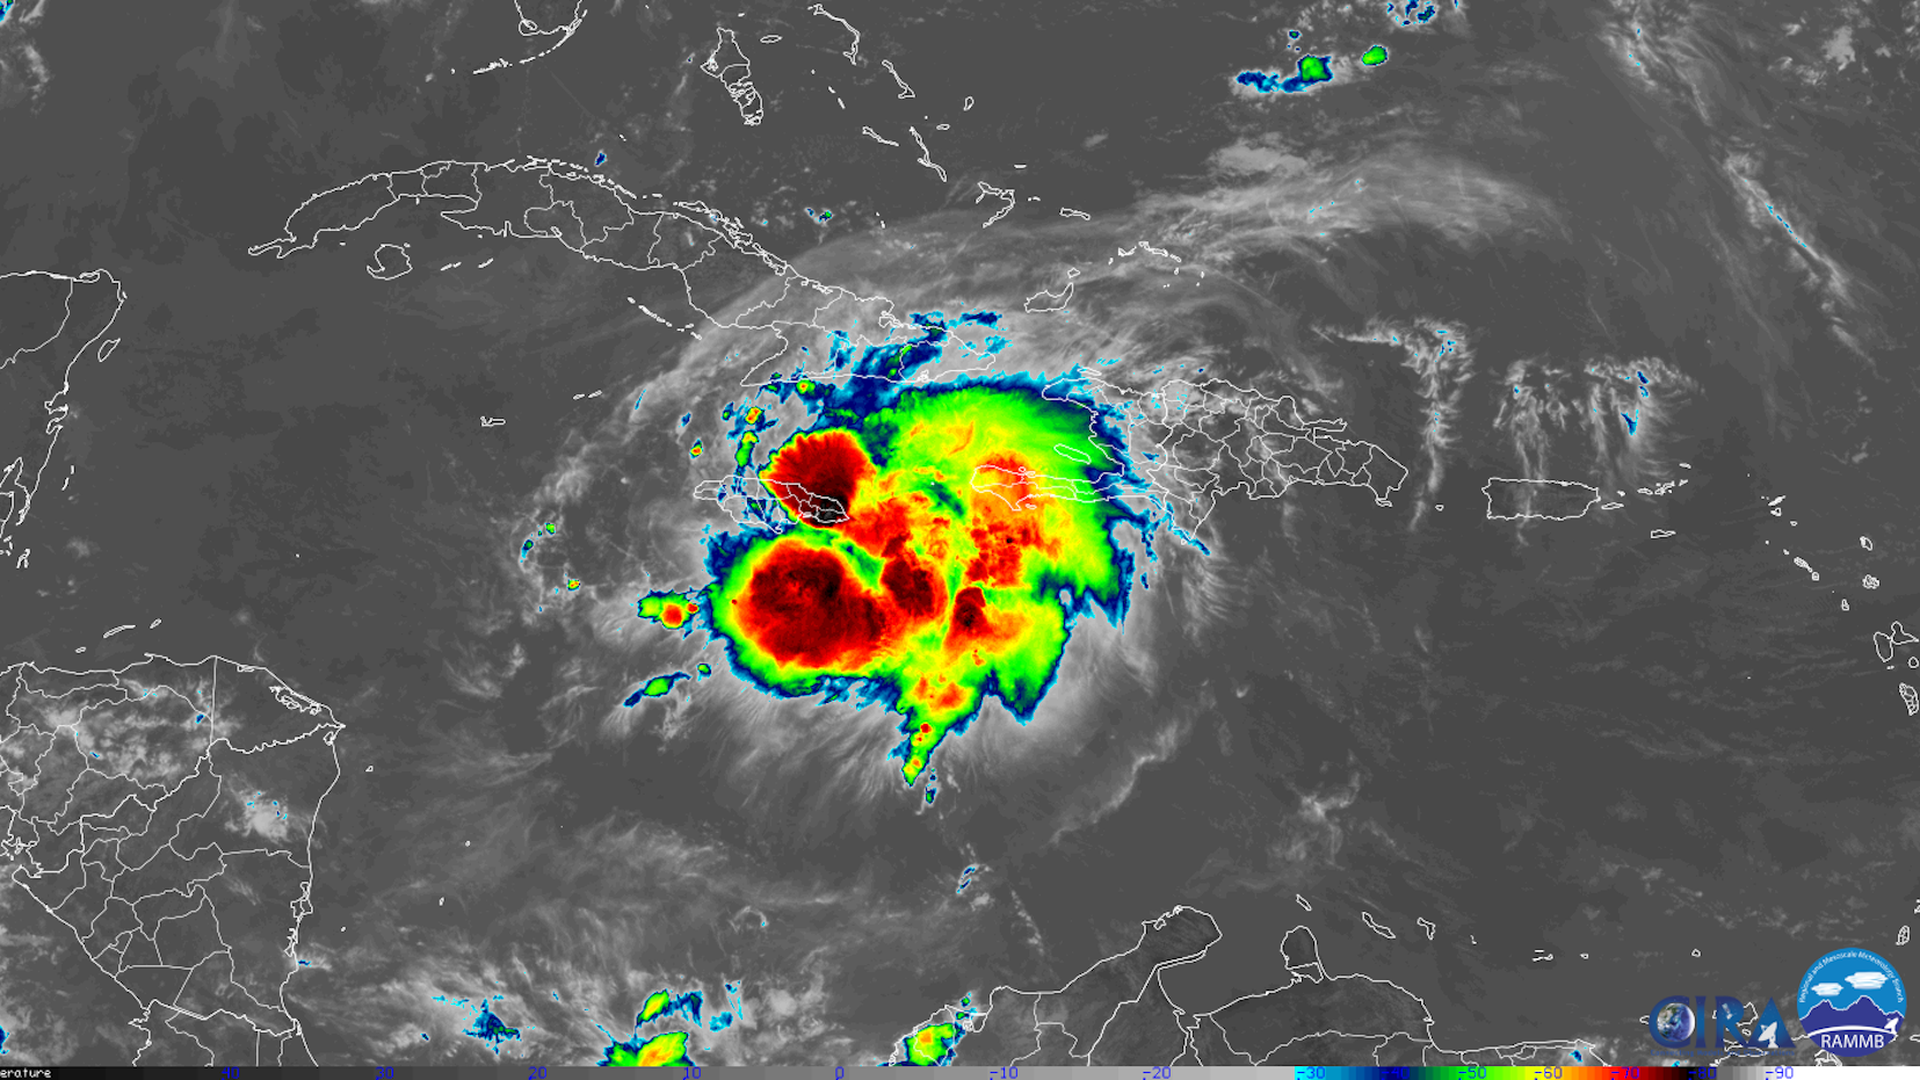 Image from a satellite showing red and orange colors from a tropical storm.